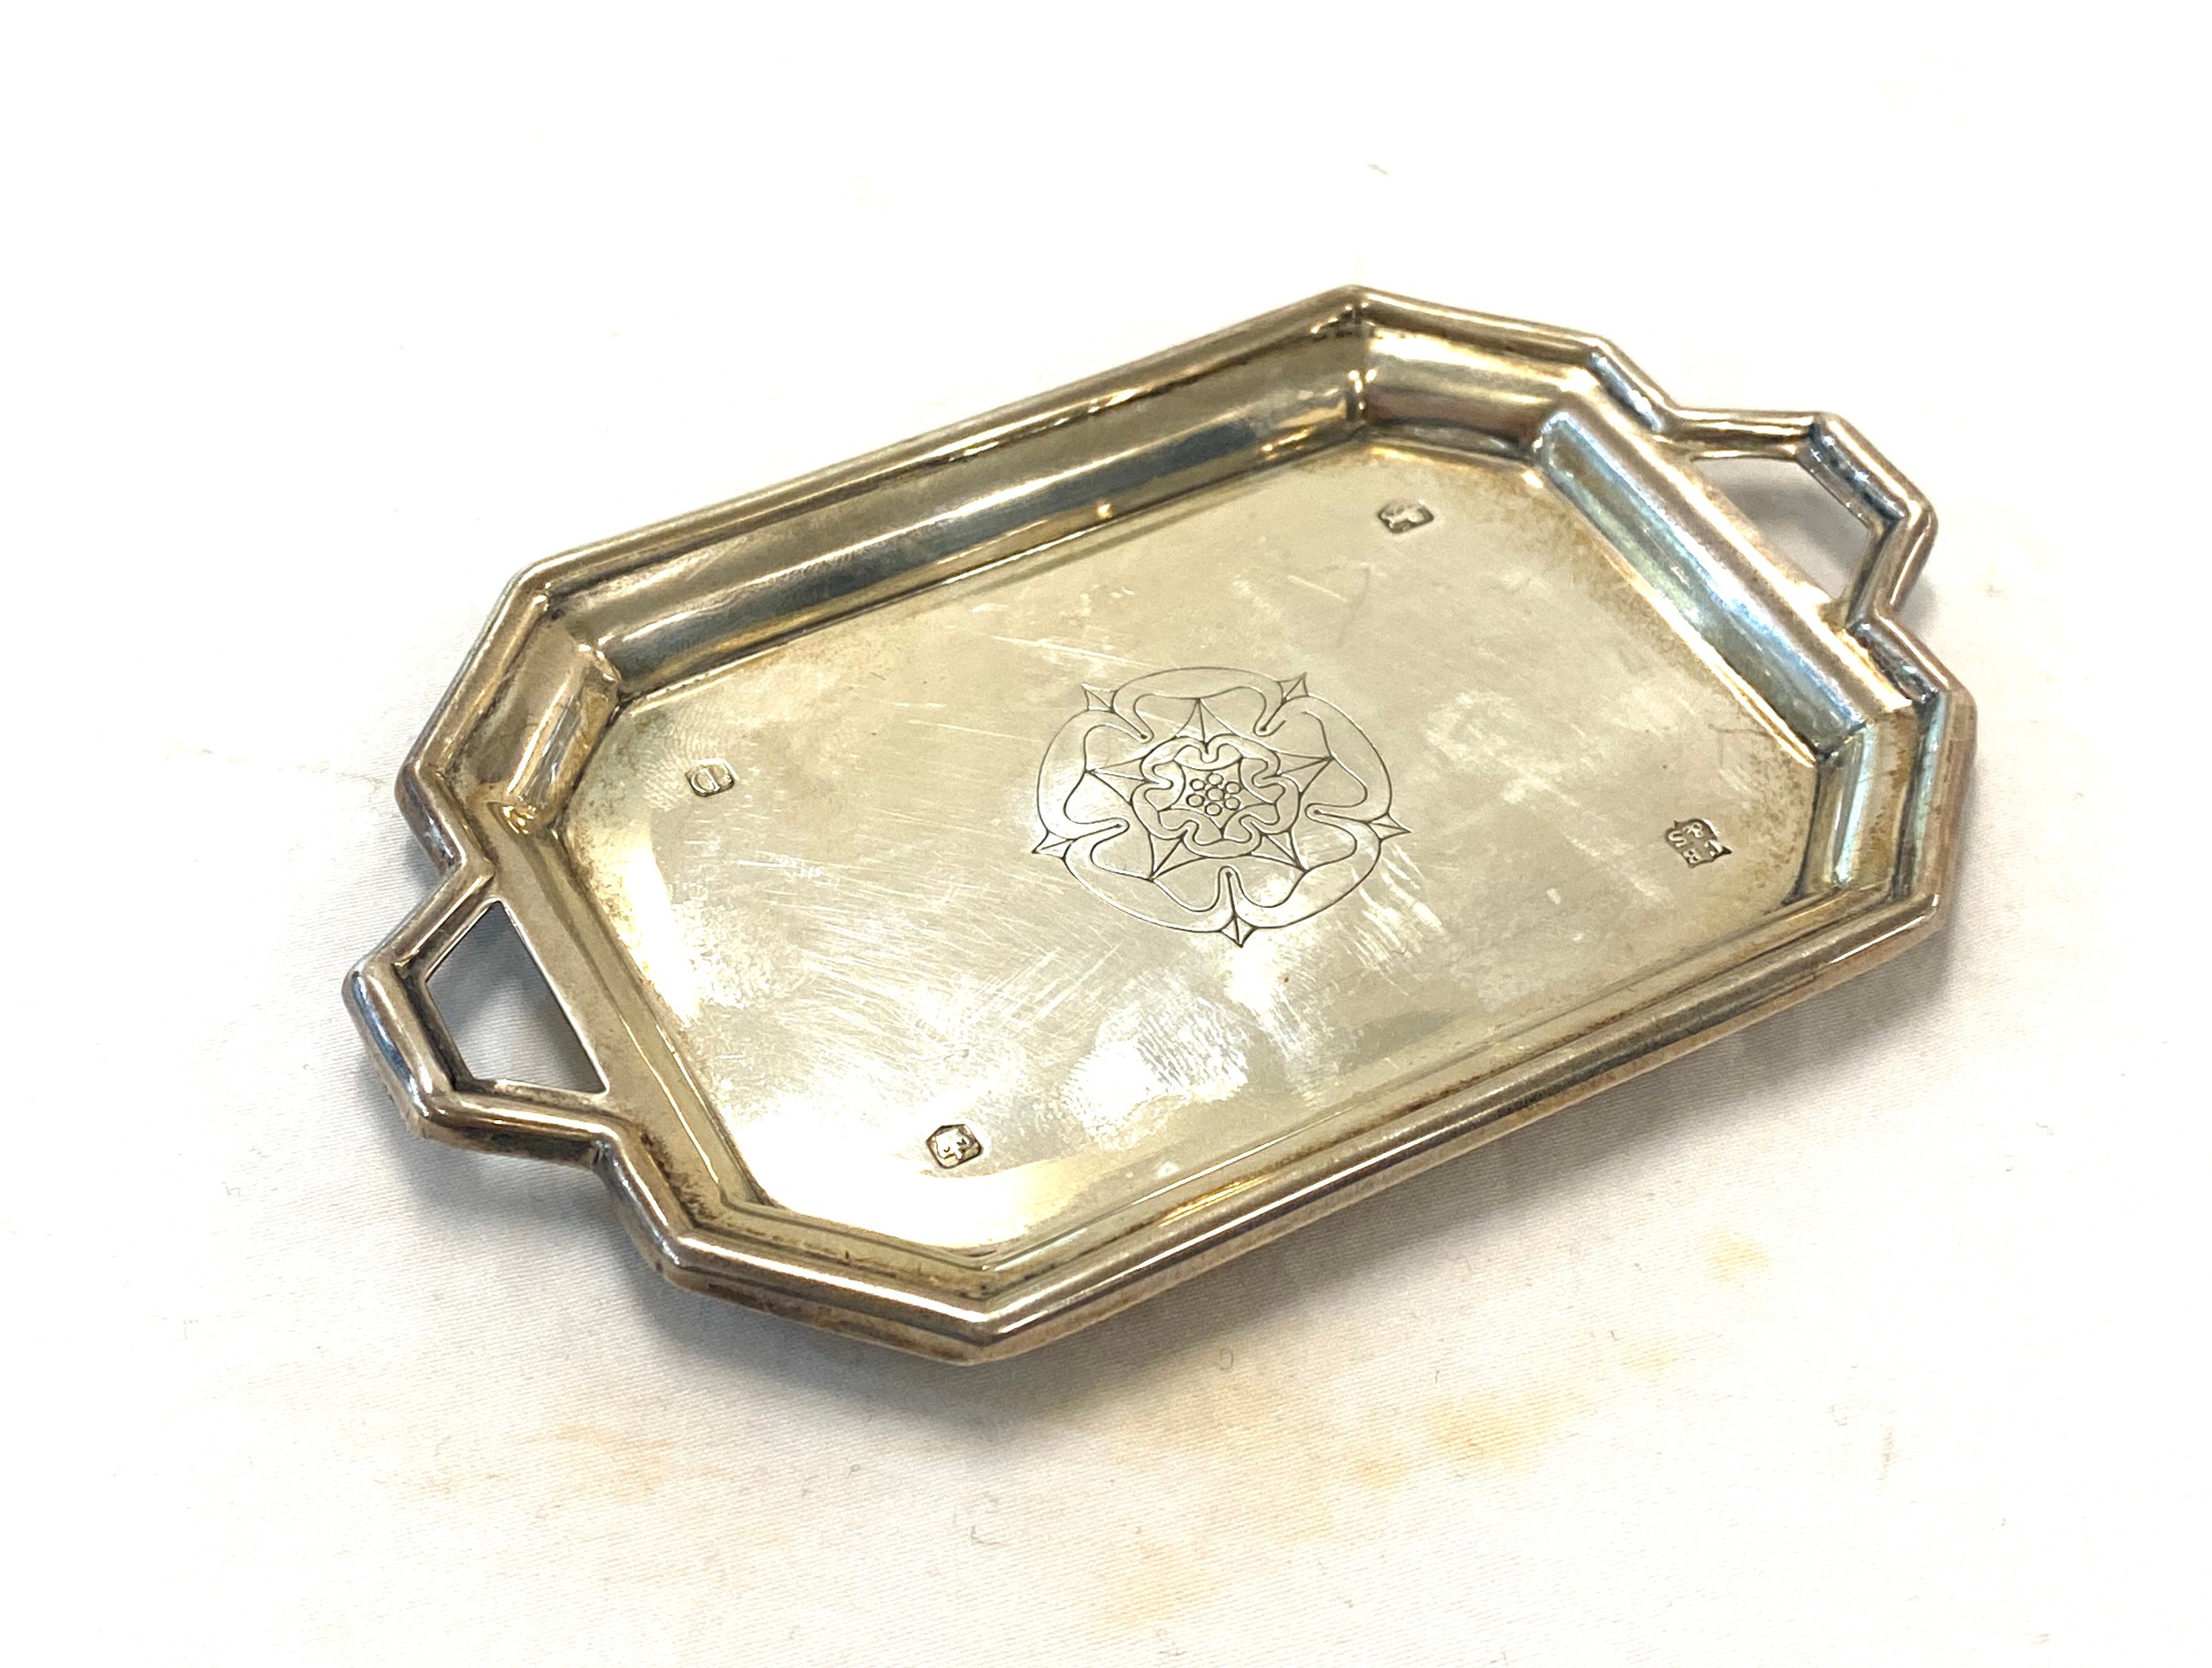 Hallmarked silver pin tray, approximate weight 51.2g, approximate size 7.5cm by 12.5cm